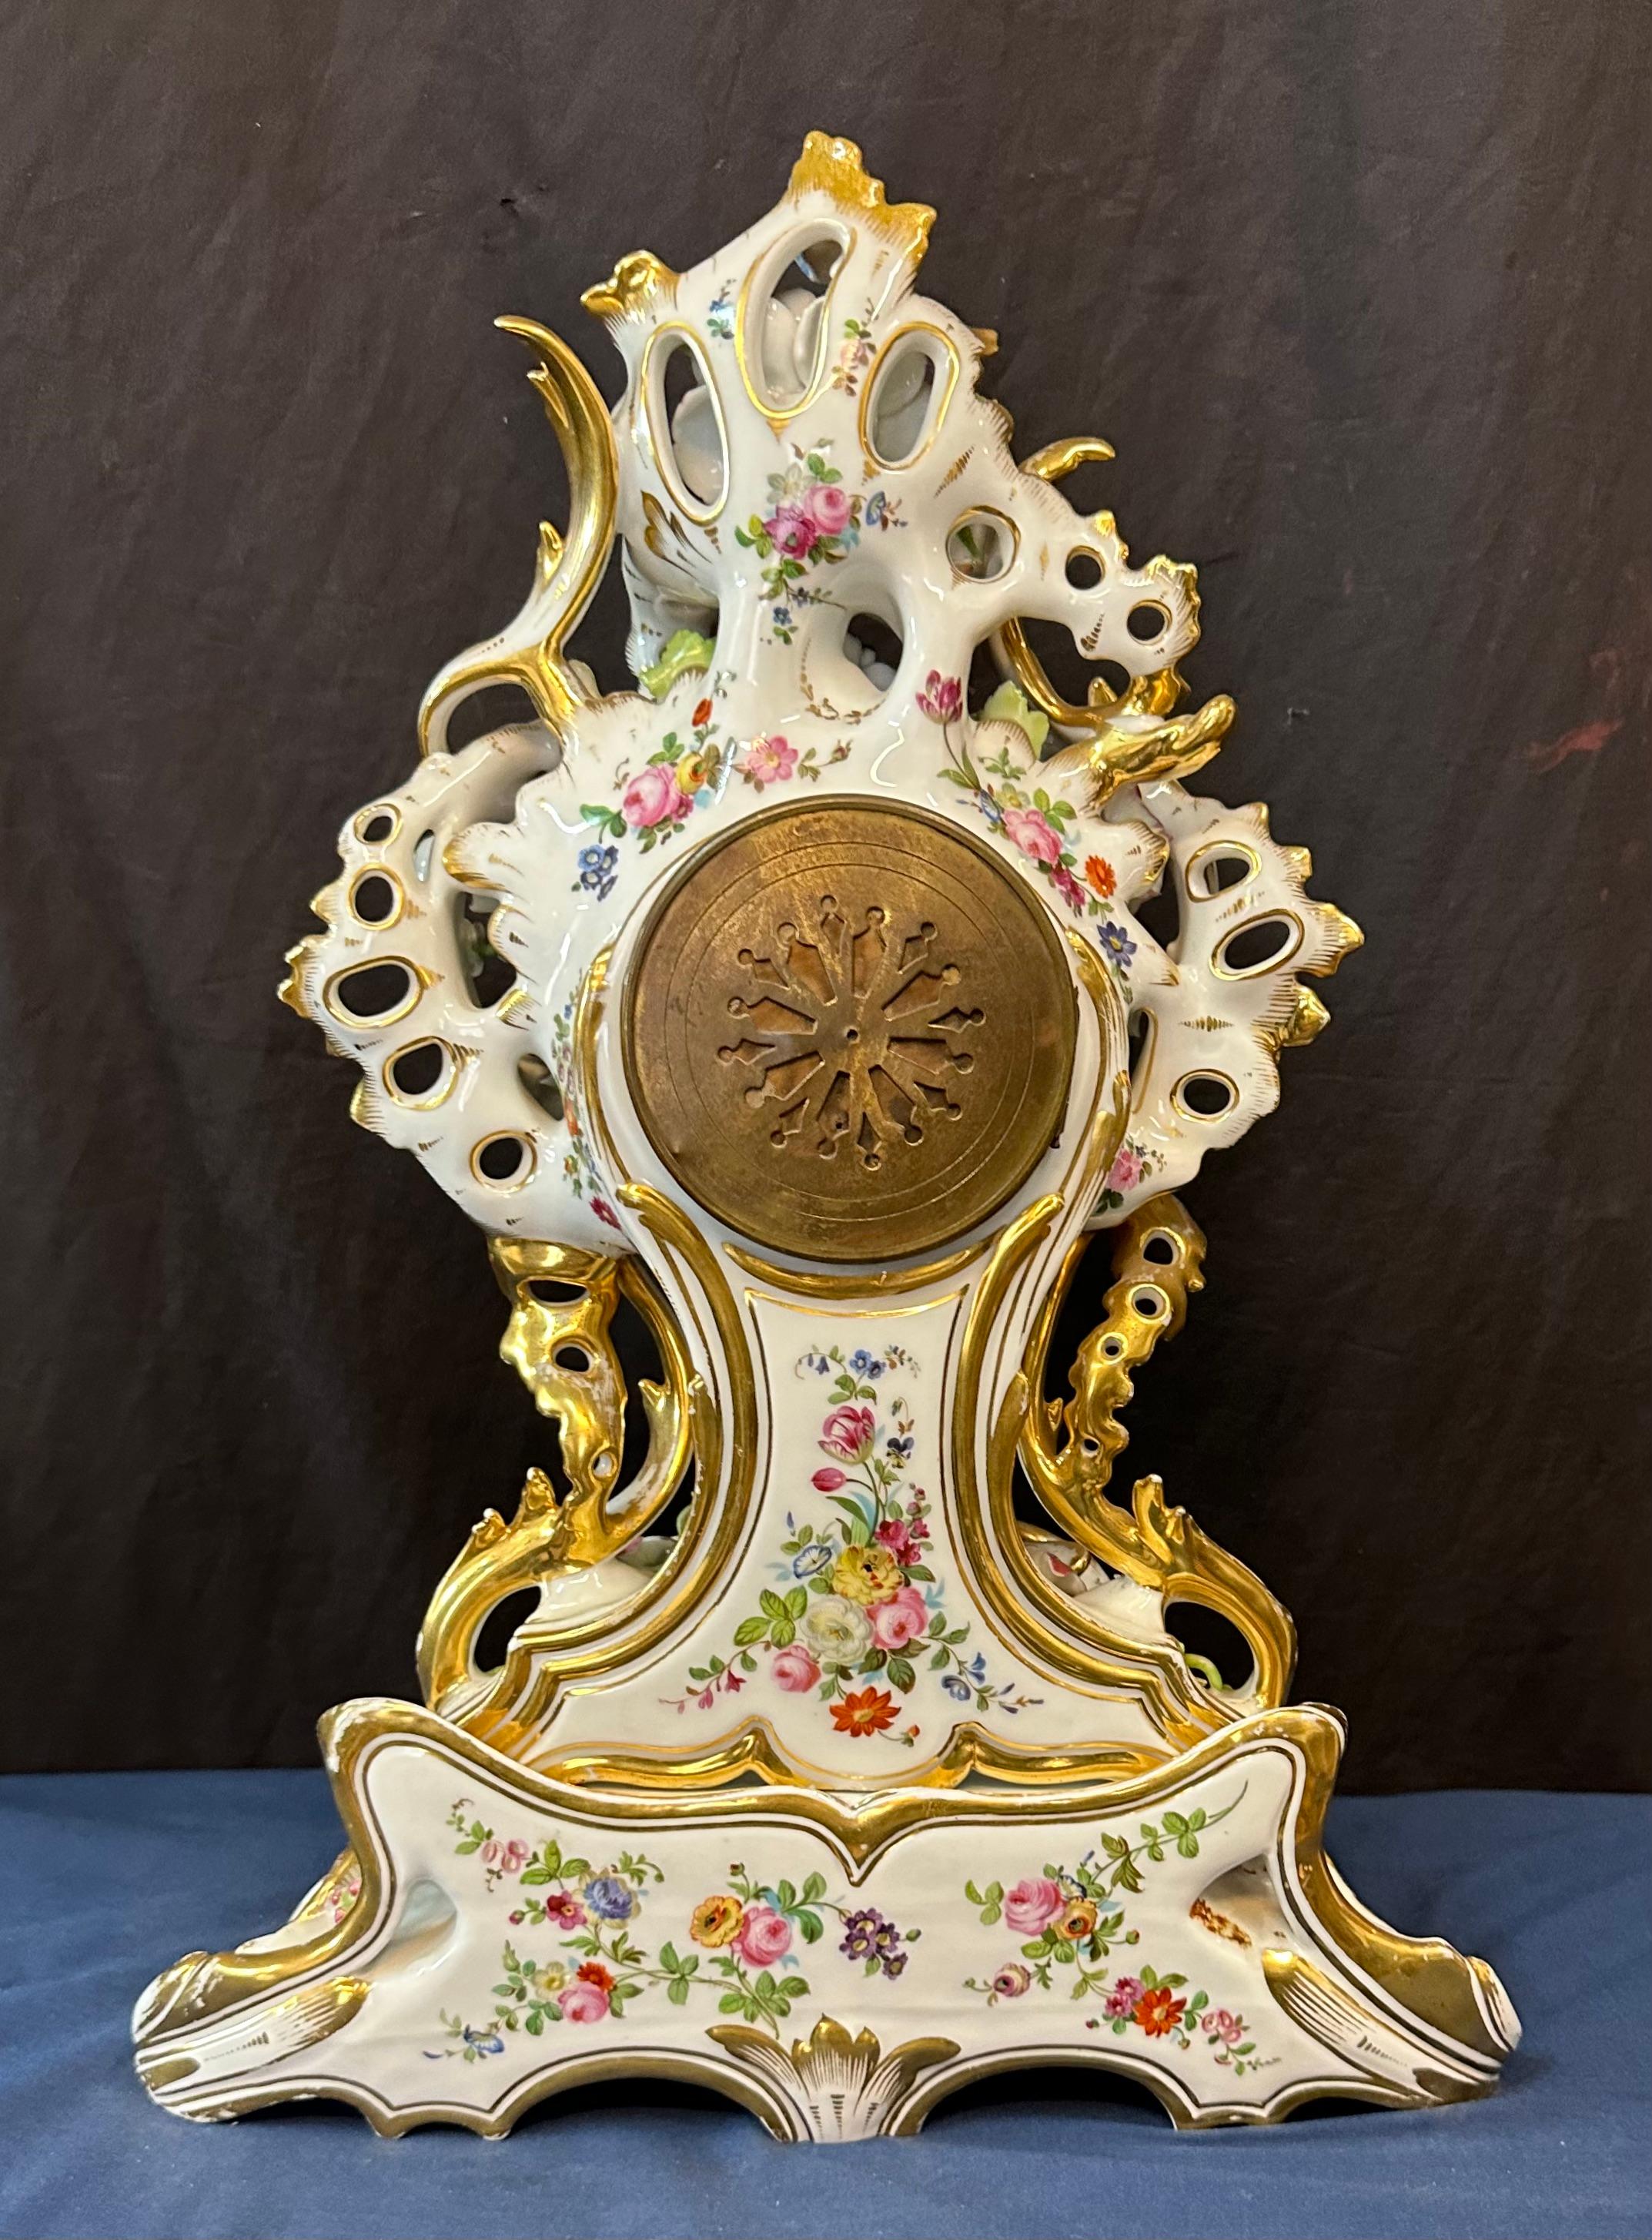 Porcelain Clock & Stand by Aubert & Klaftenberger In Good Condition For Sale In Bronx, NY